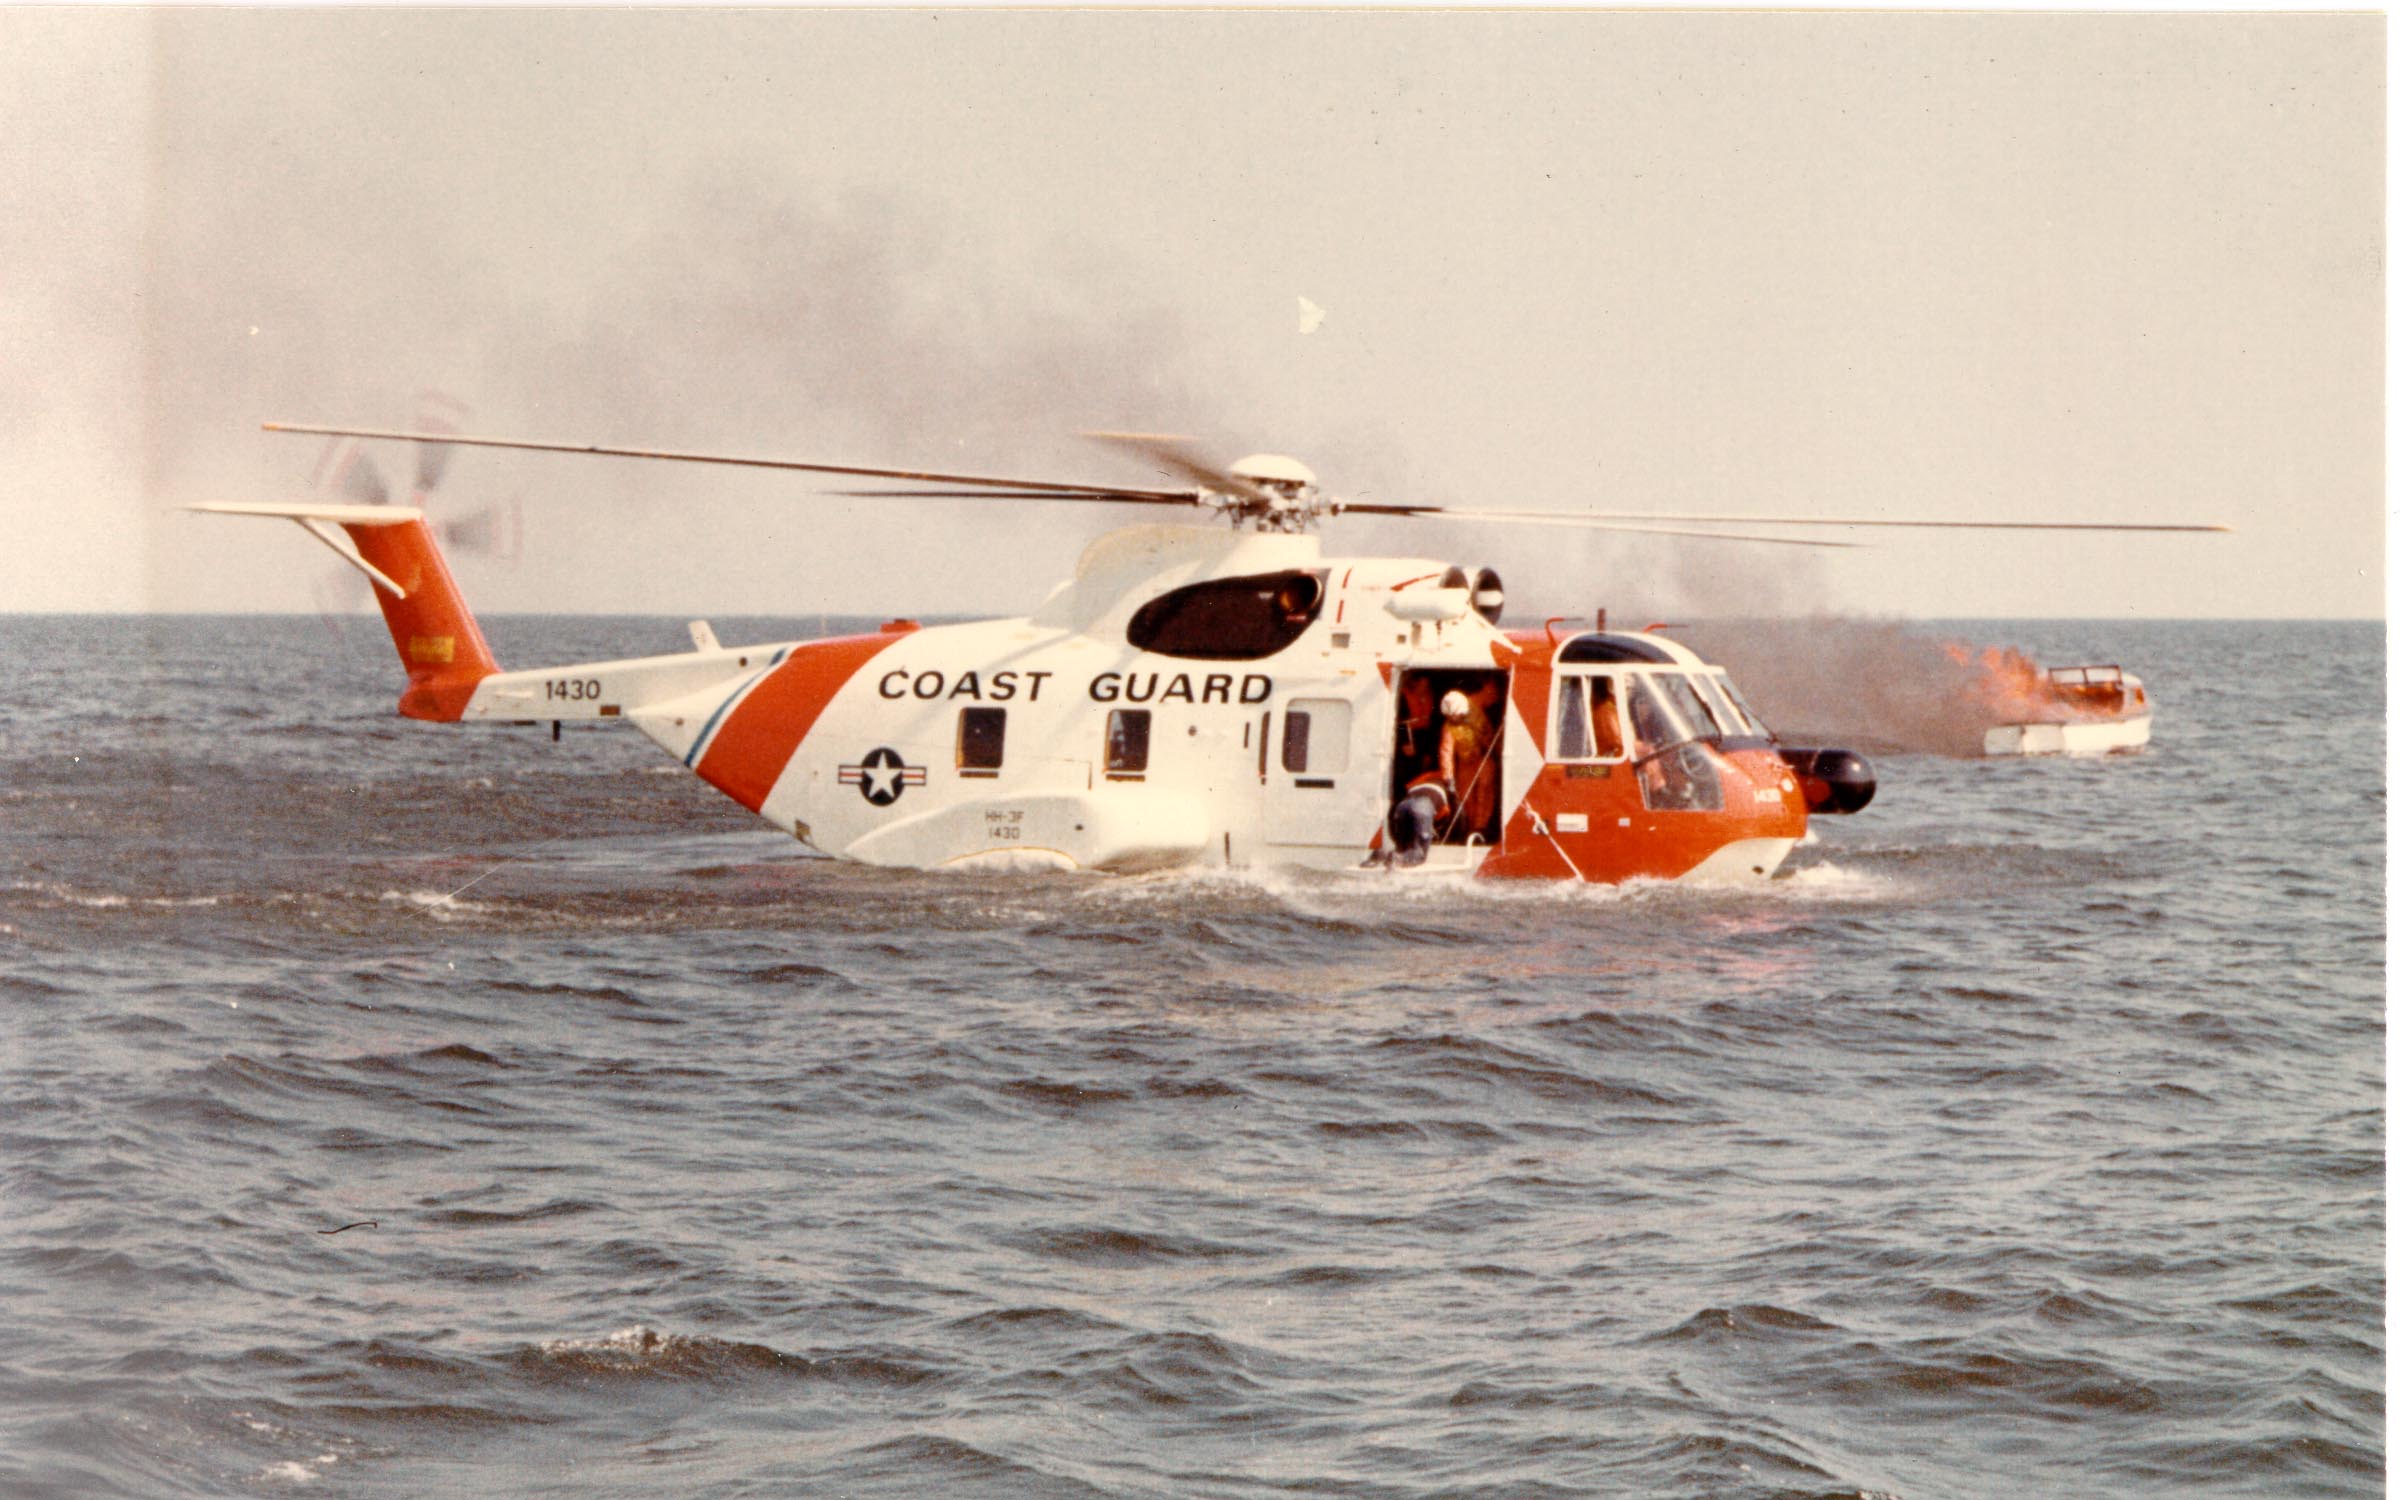 HH-3F_Pelican_on_the_water_with_a_burning_boat.jpg